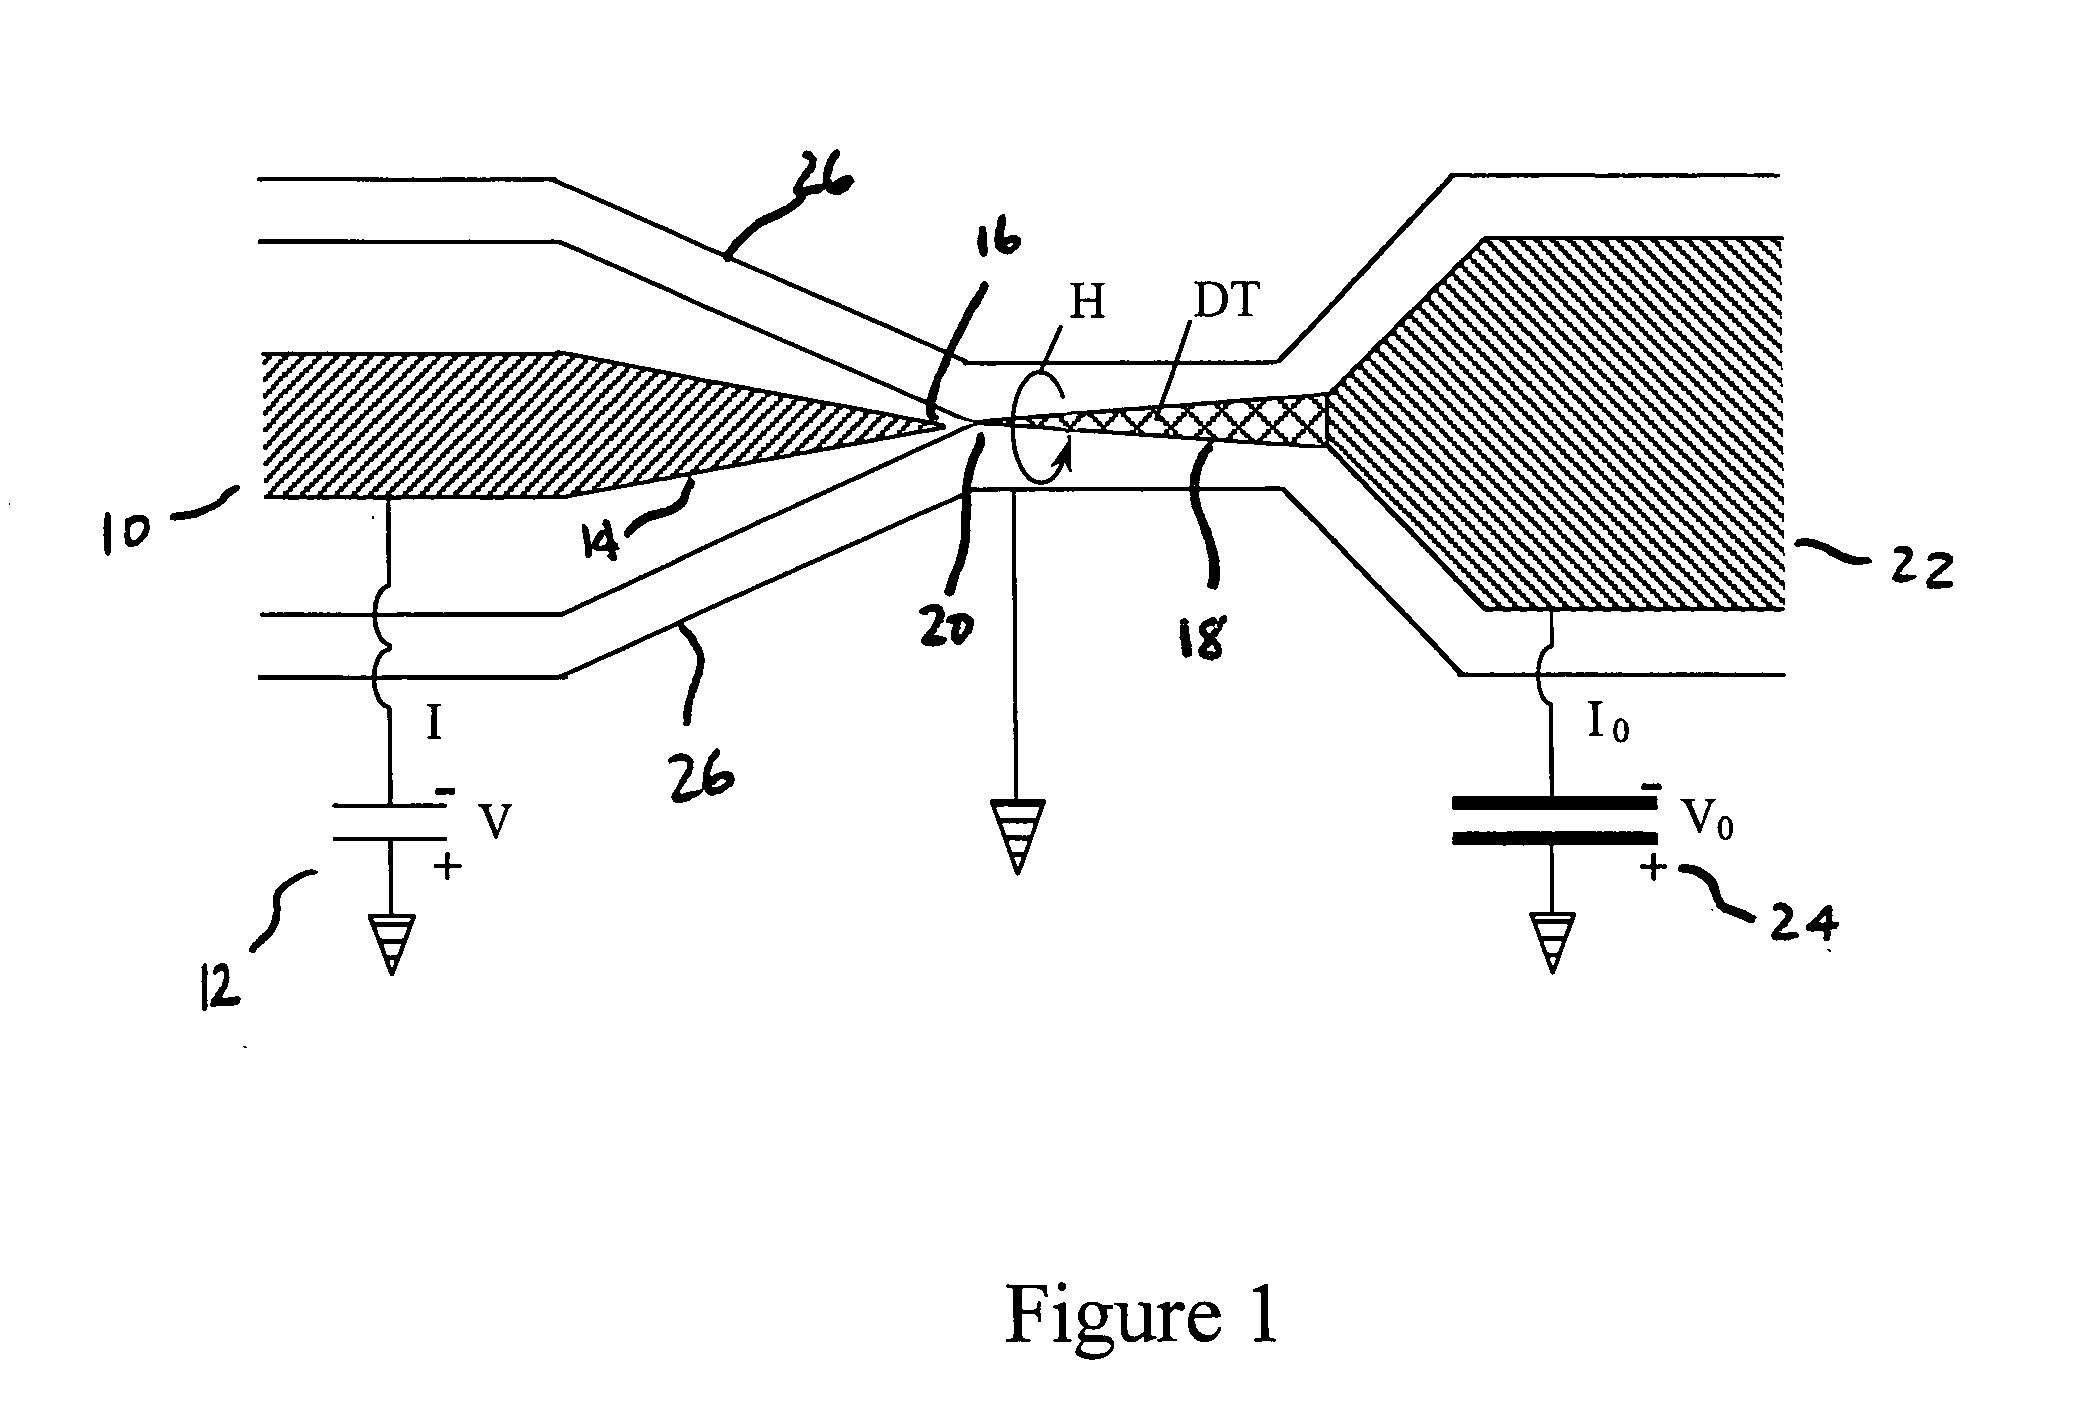 Apparatus and method for ignition of high-gain thermonuclear microexplosions with electric-pulse power